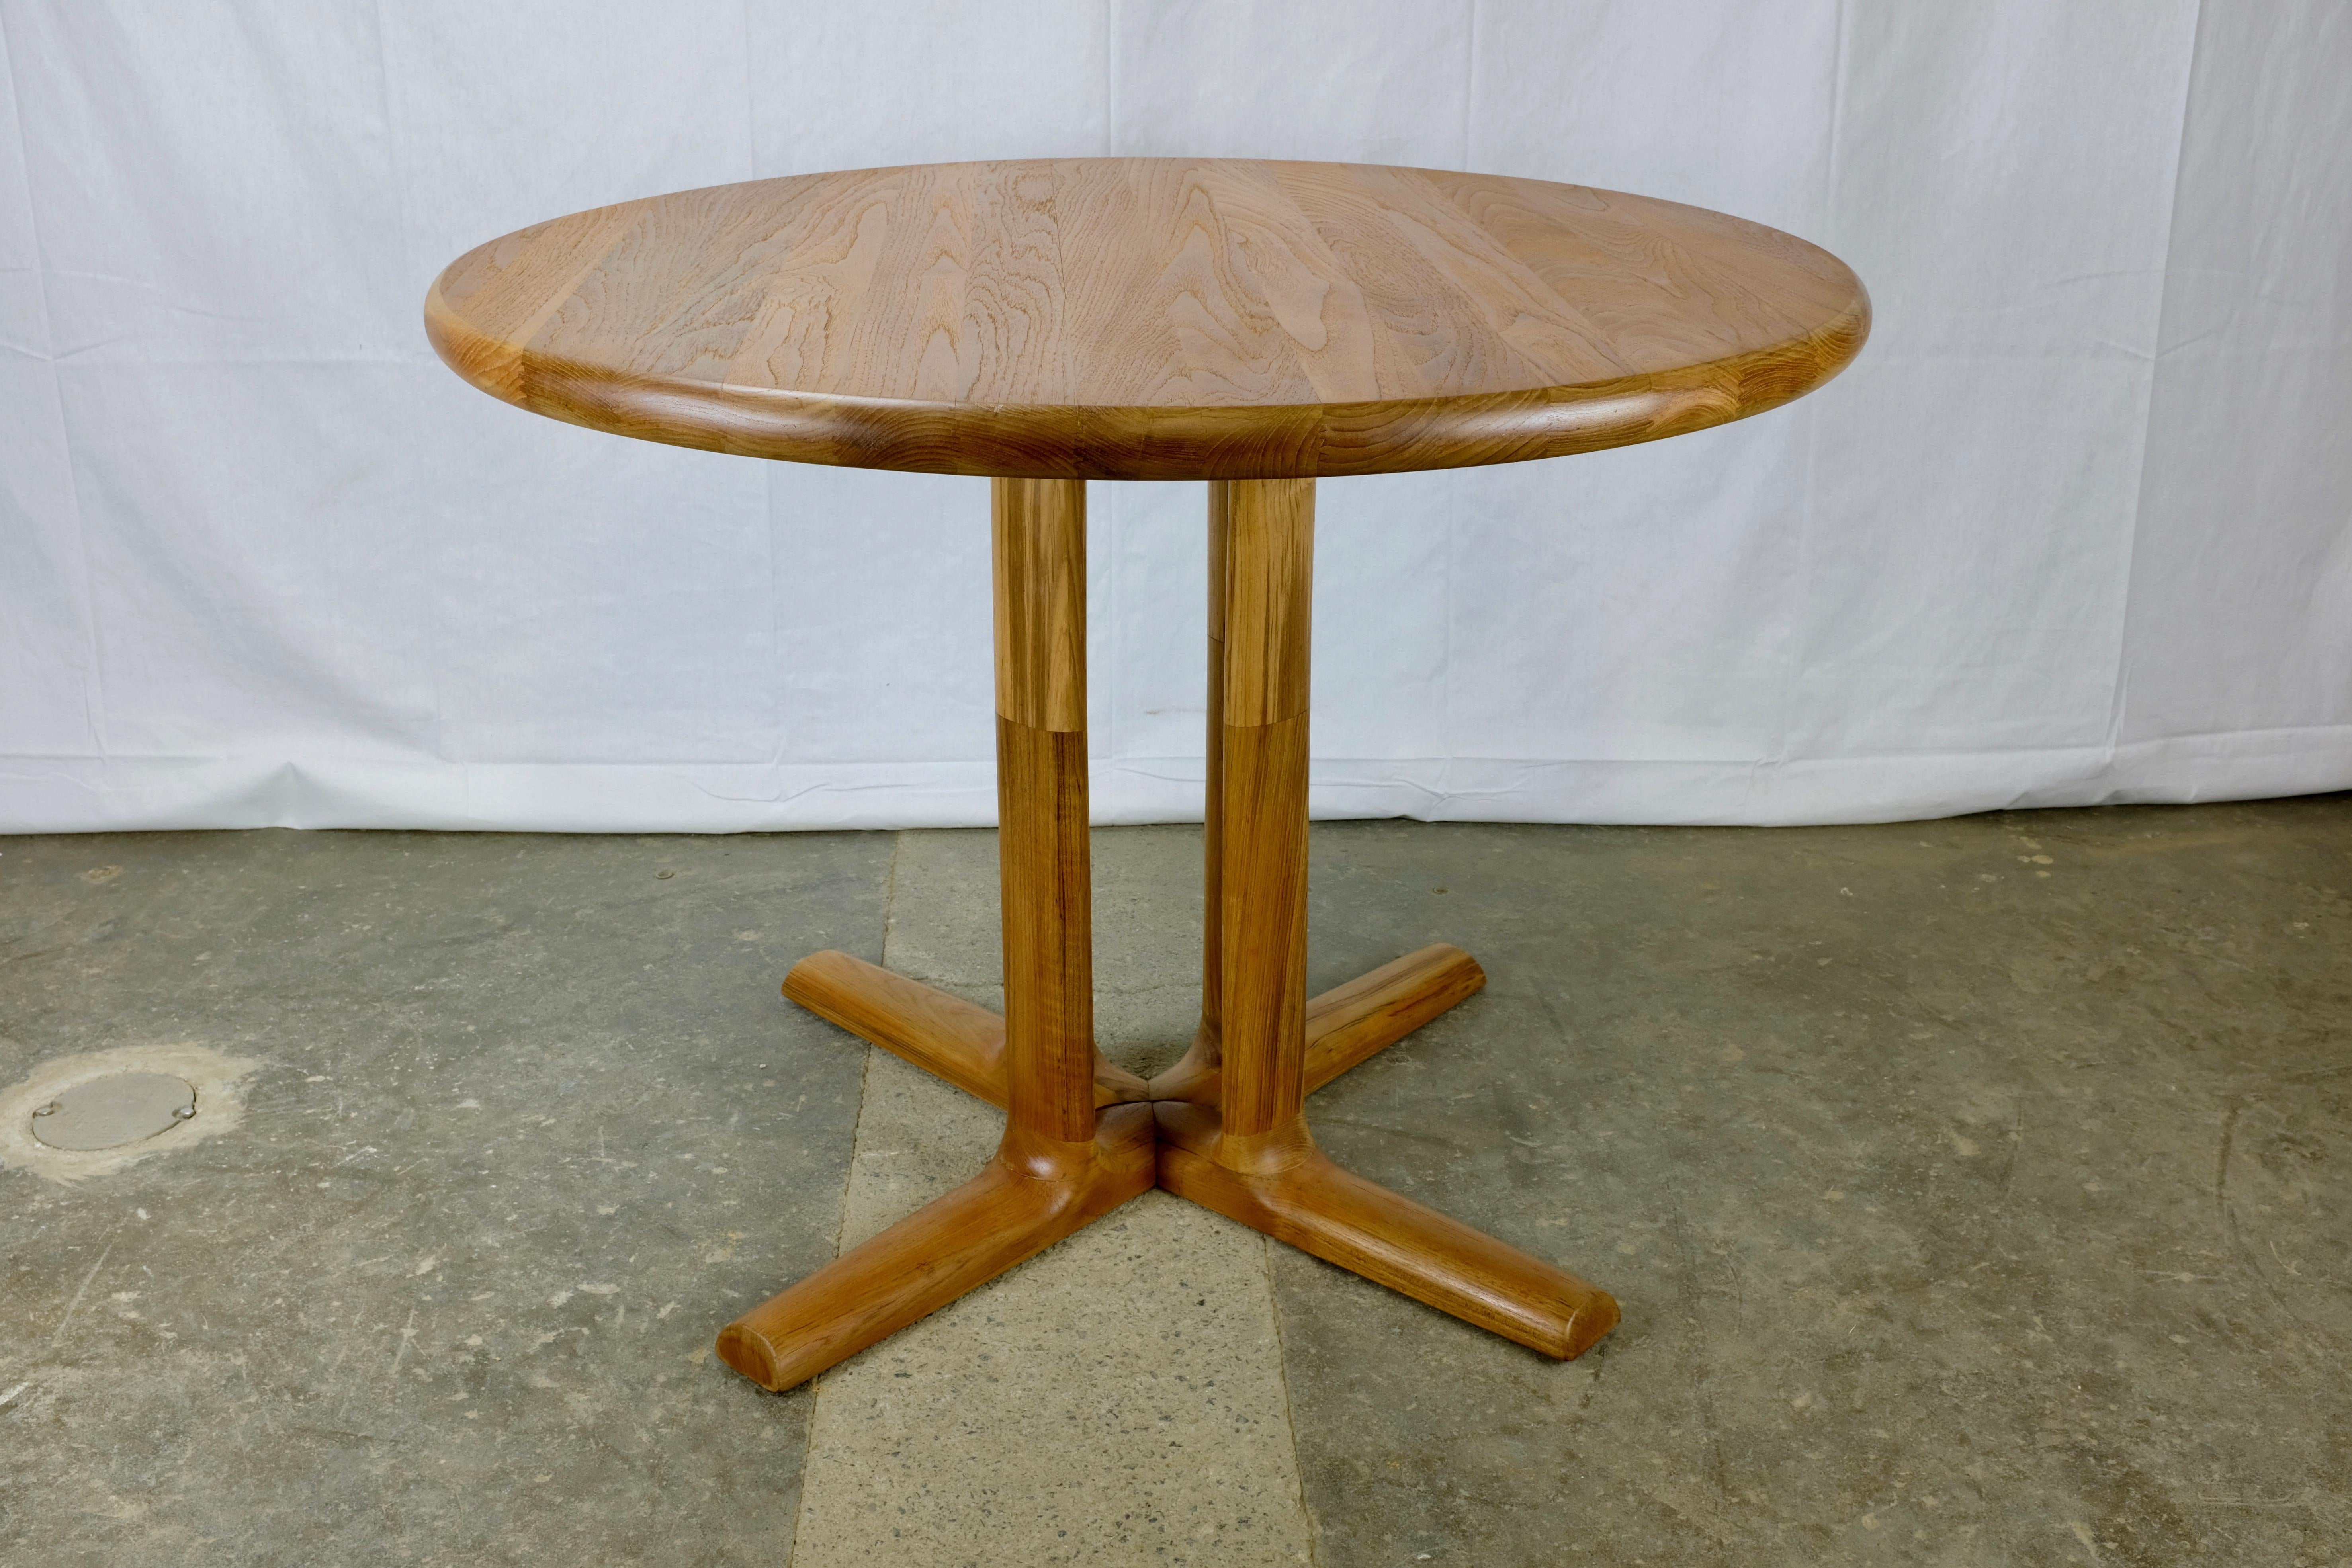 Circular dining table featuring a wonderful solid teak top with a thickness of 1.75